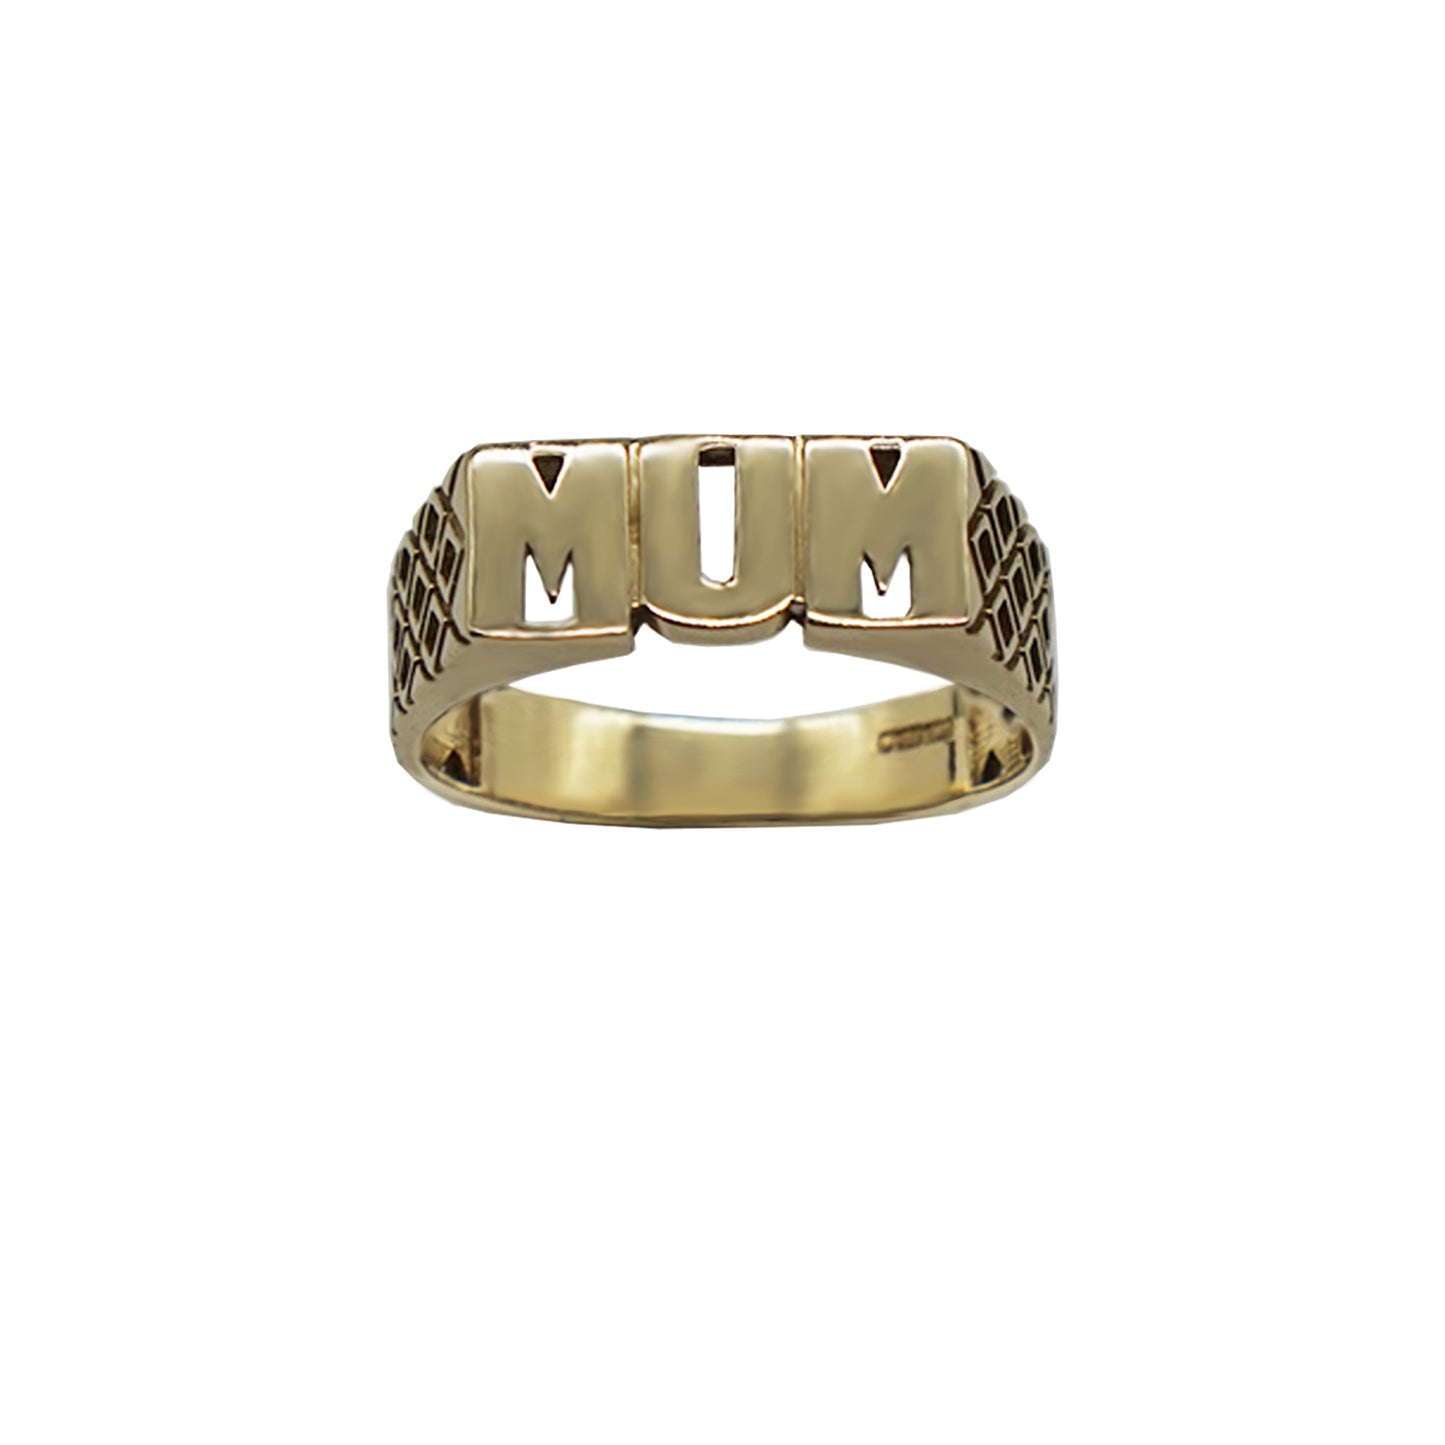 Vintage 9K Gold MUM ring in capitals, with Geo side details, hallmarks can be seen on inner band. Background white.